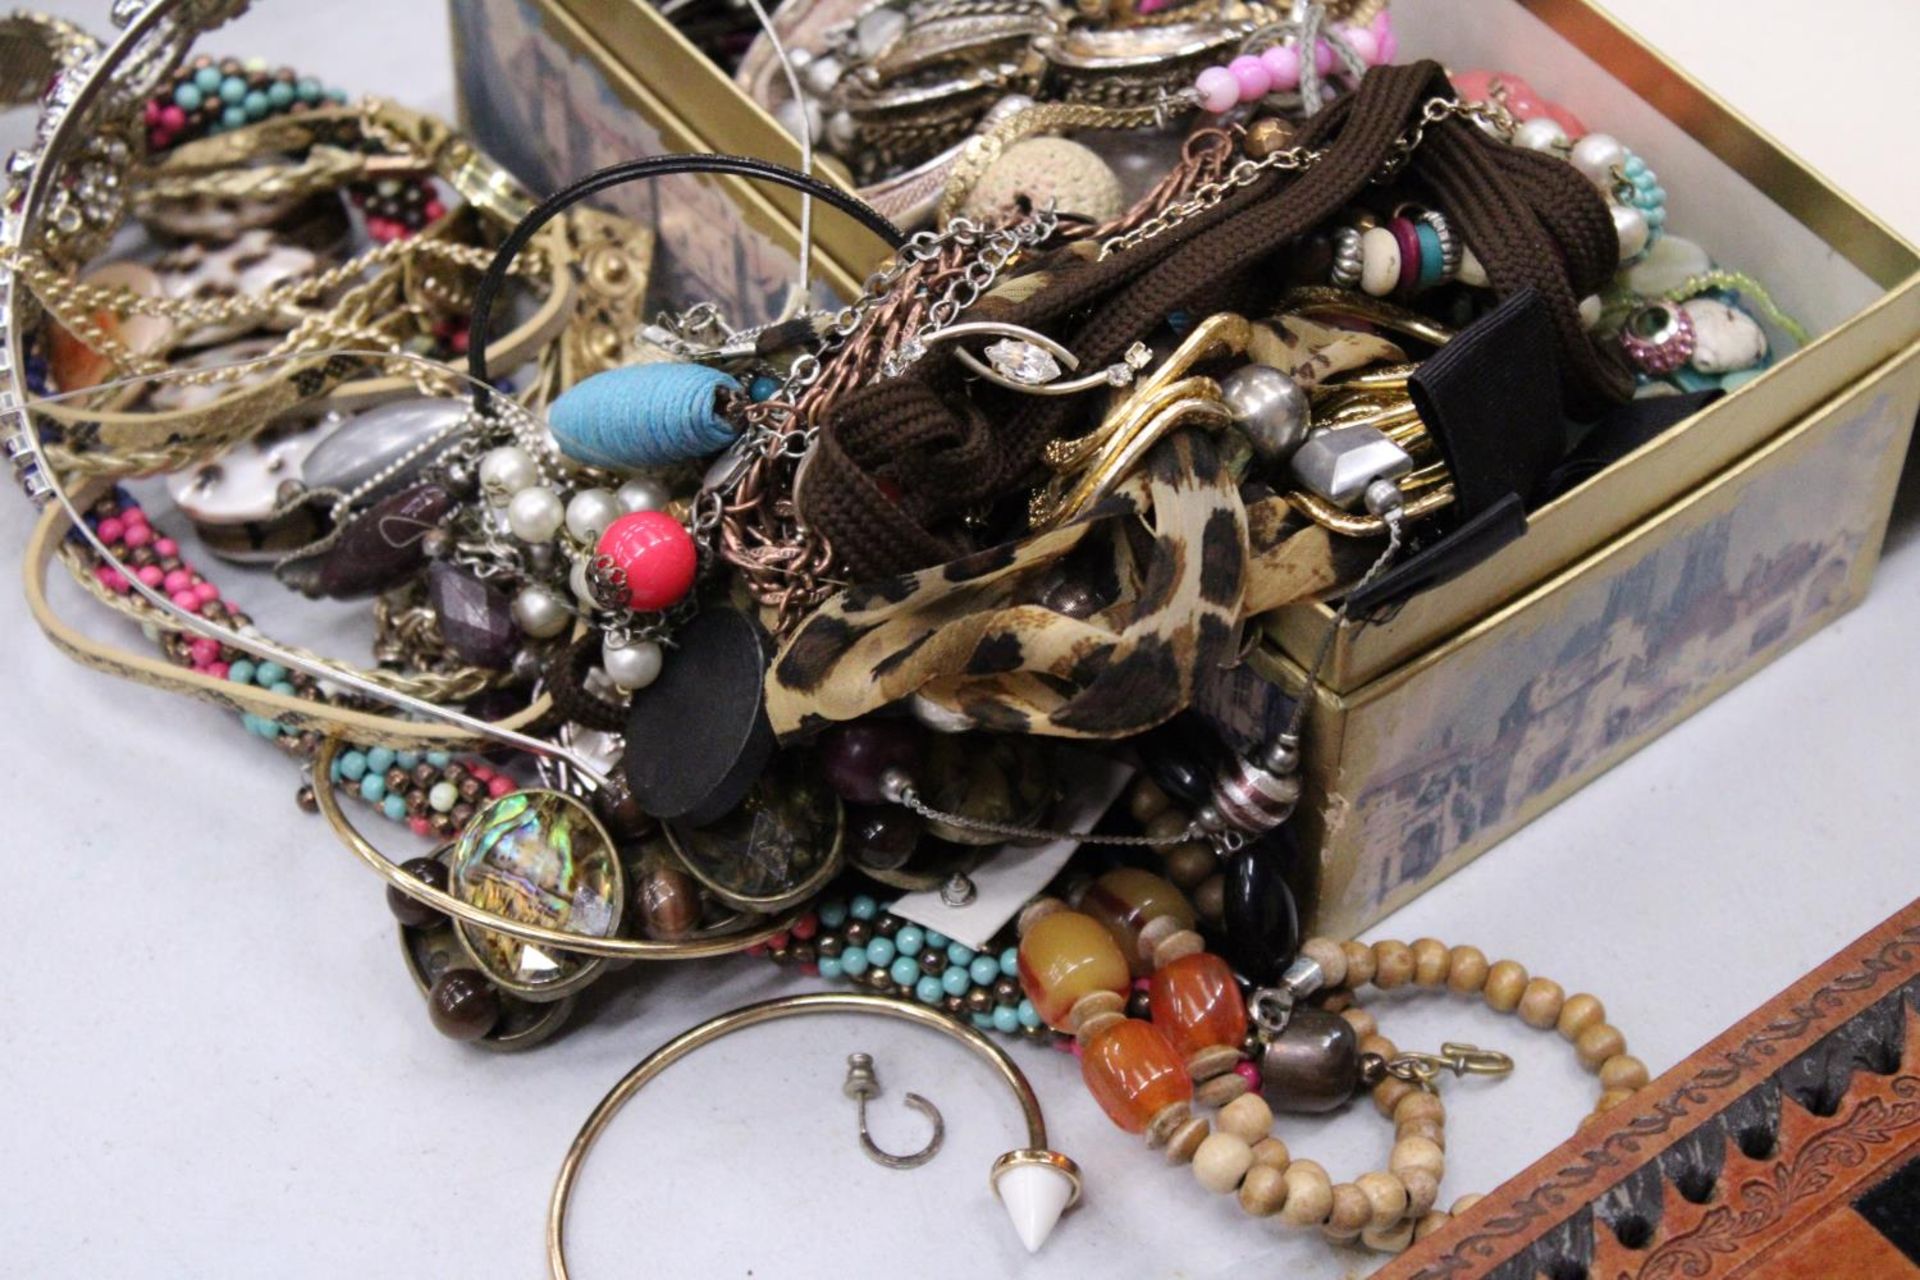 A QUANTITY OF COSTUME JEWELLERY TO INCLUDE NECKLACES, EARRINGS, BANGLES, ETC, IN A DOMED BOX - Image 4 of 5